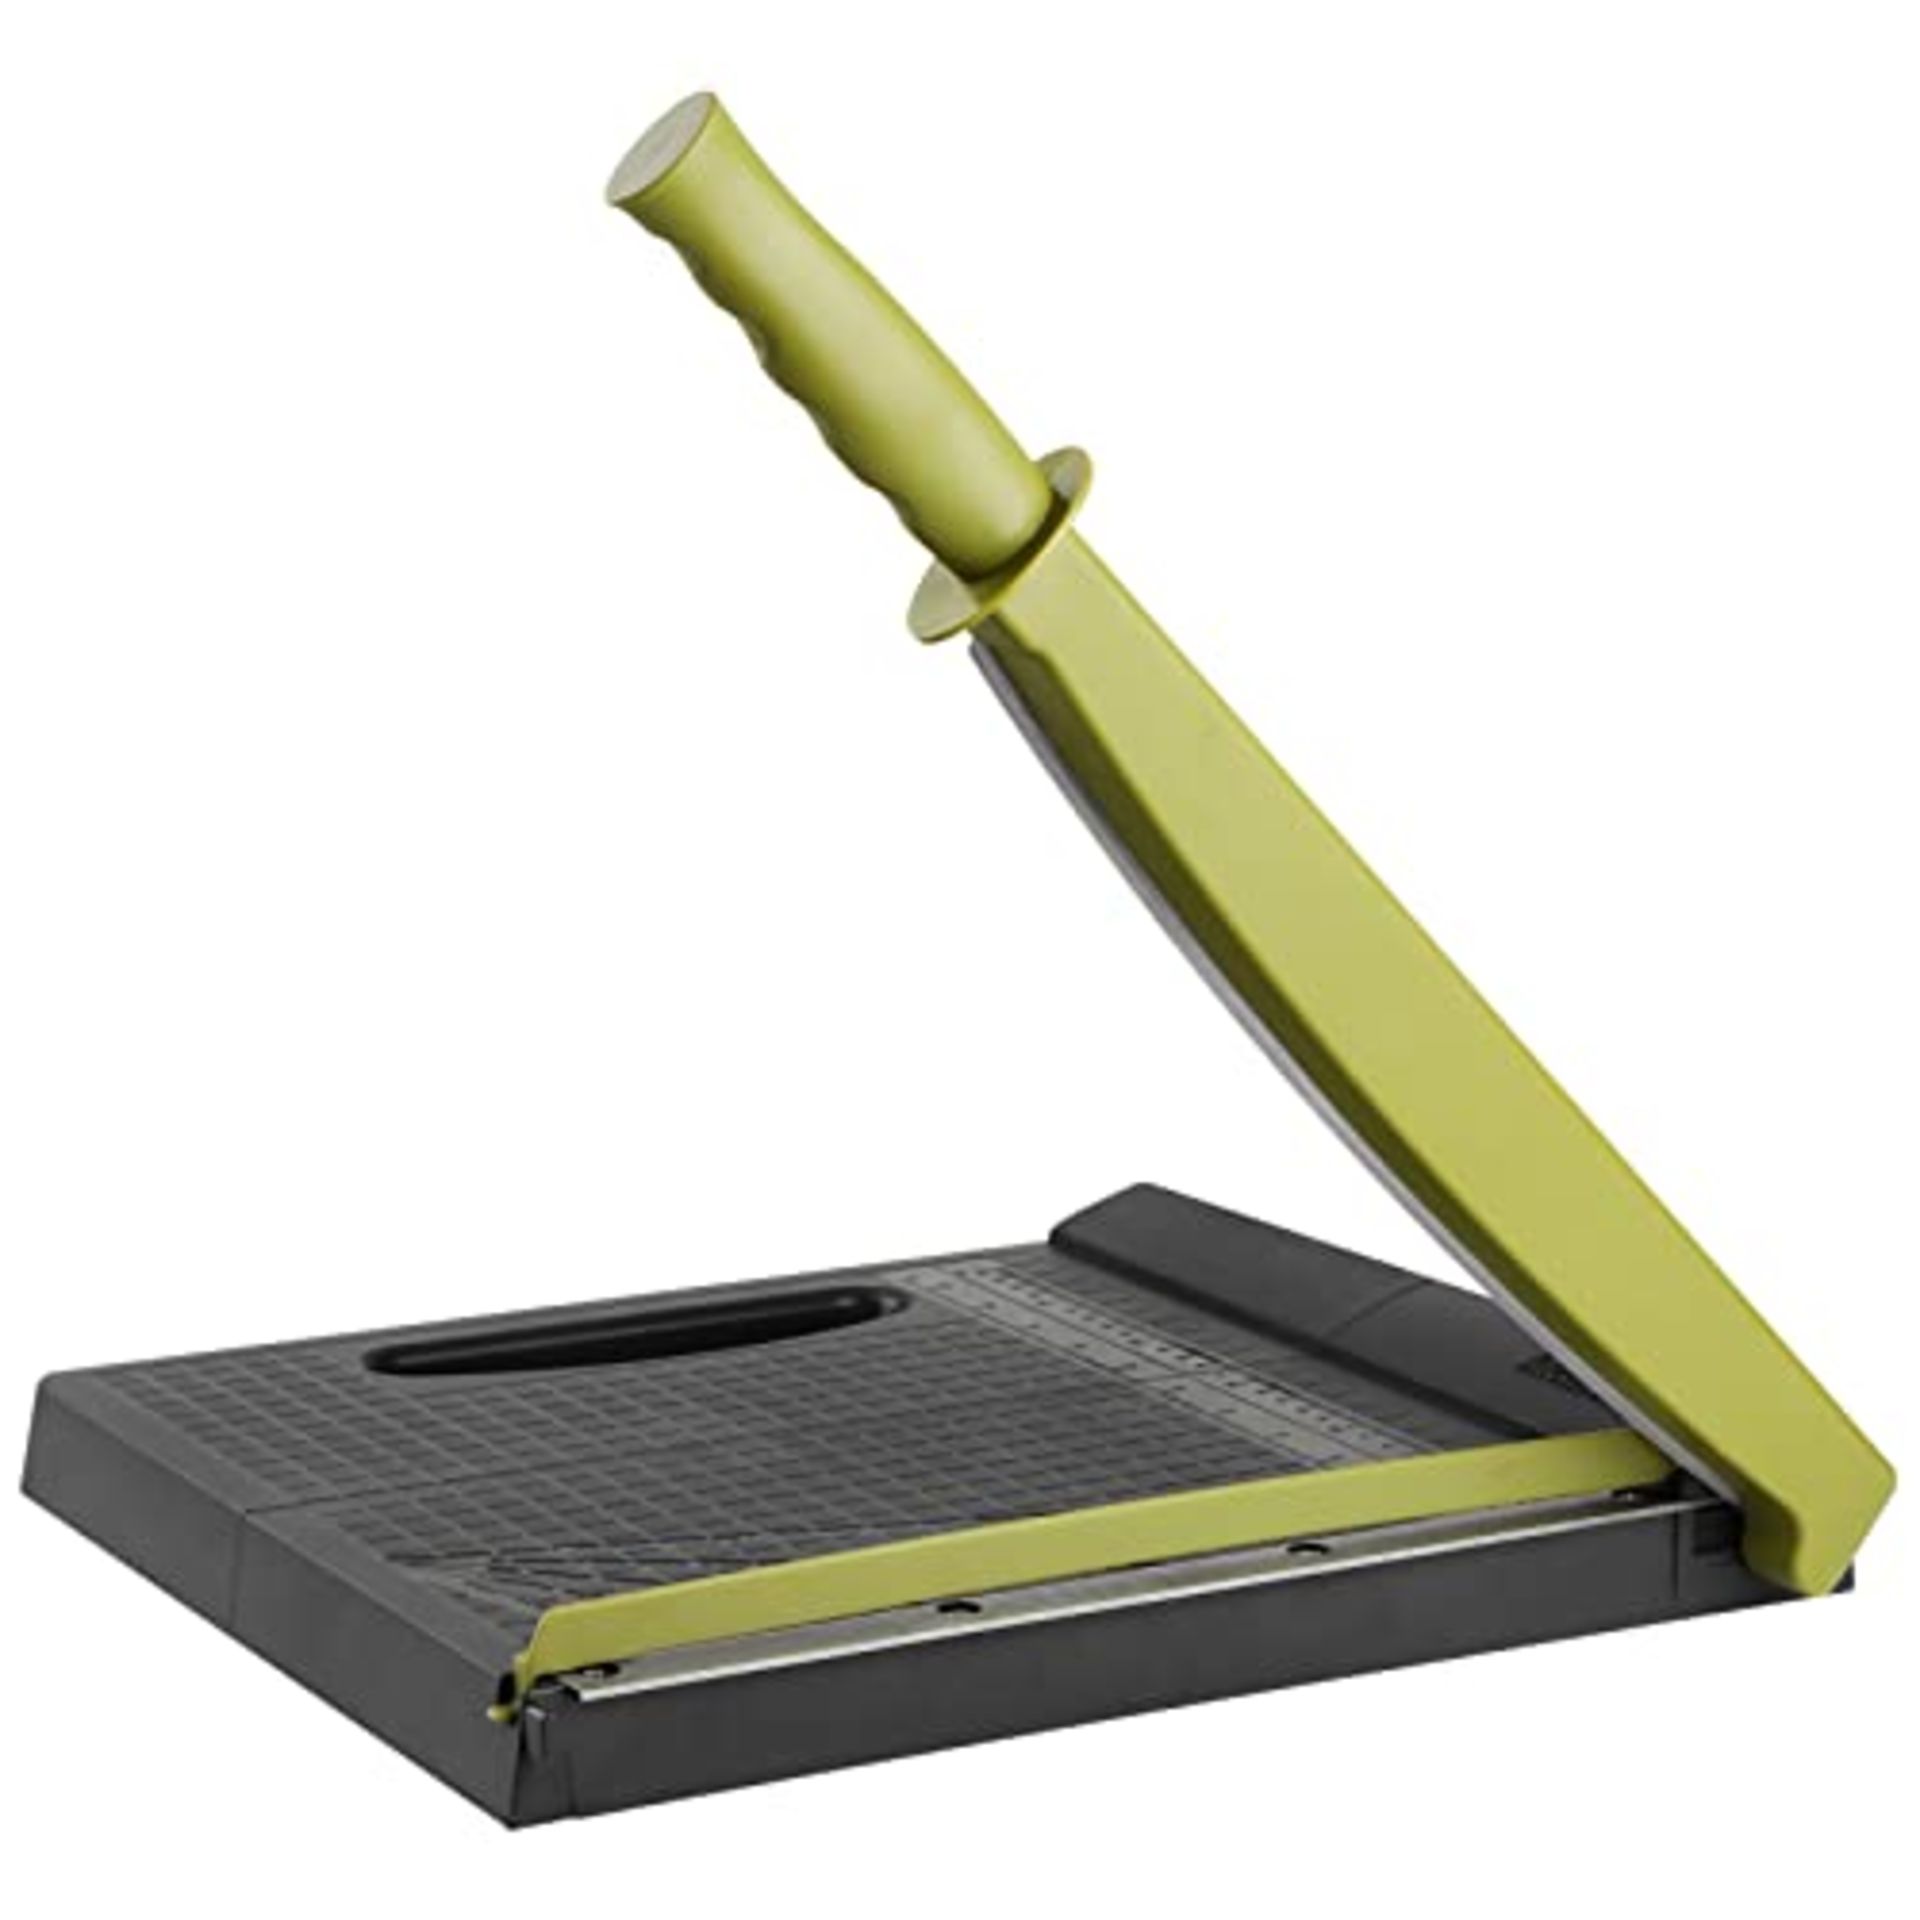 A4 Paper Cutter Guillotine, 12" Cut Length, 16 Sheets Capacity, Portable Stack Paper T - Image 7 of 12